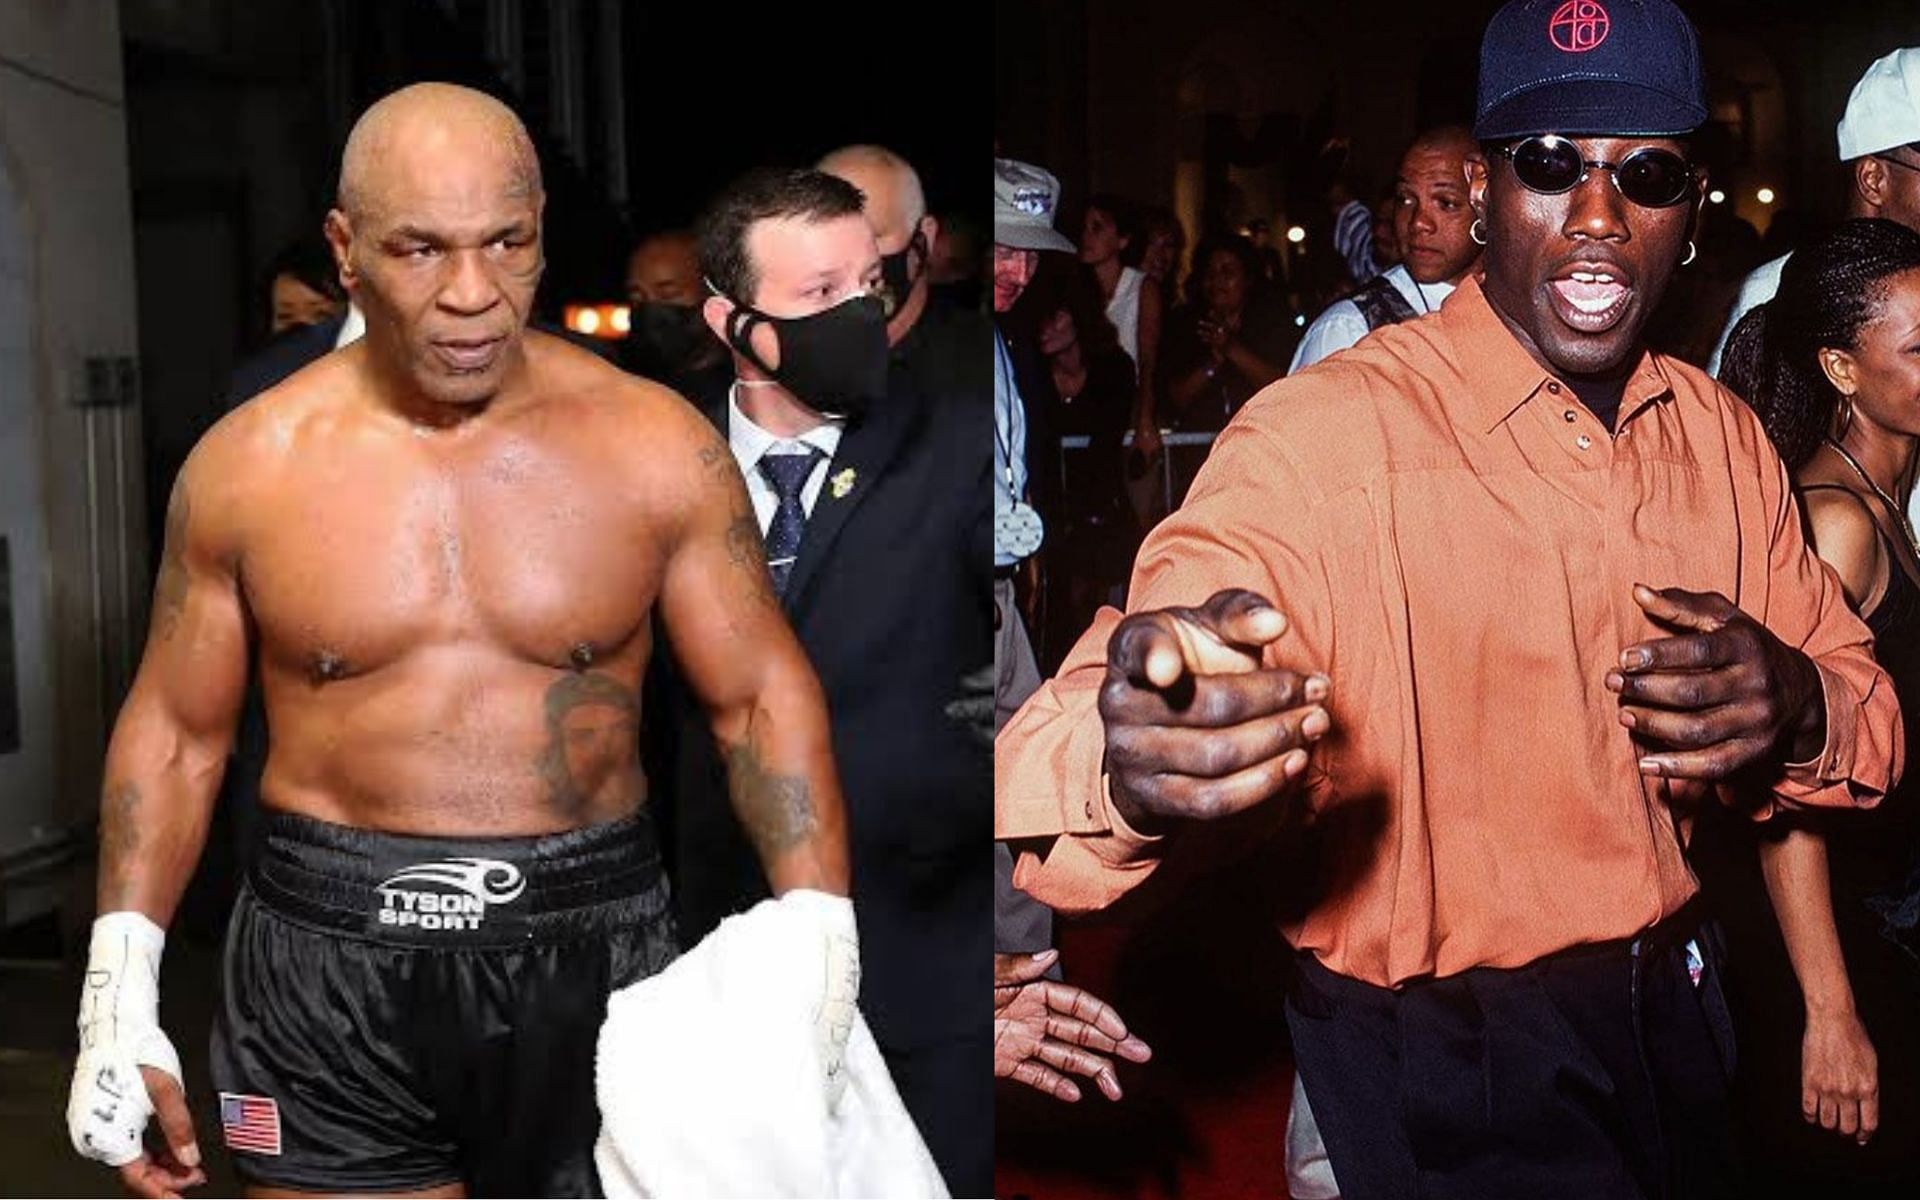 Mike Tyson (left) and Wesley Snipes (right). (Photos from Getty Images and @realwesleysnipes Instagram)